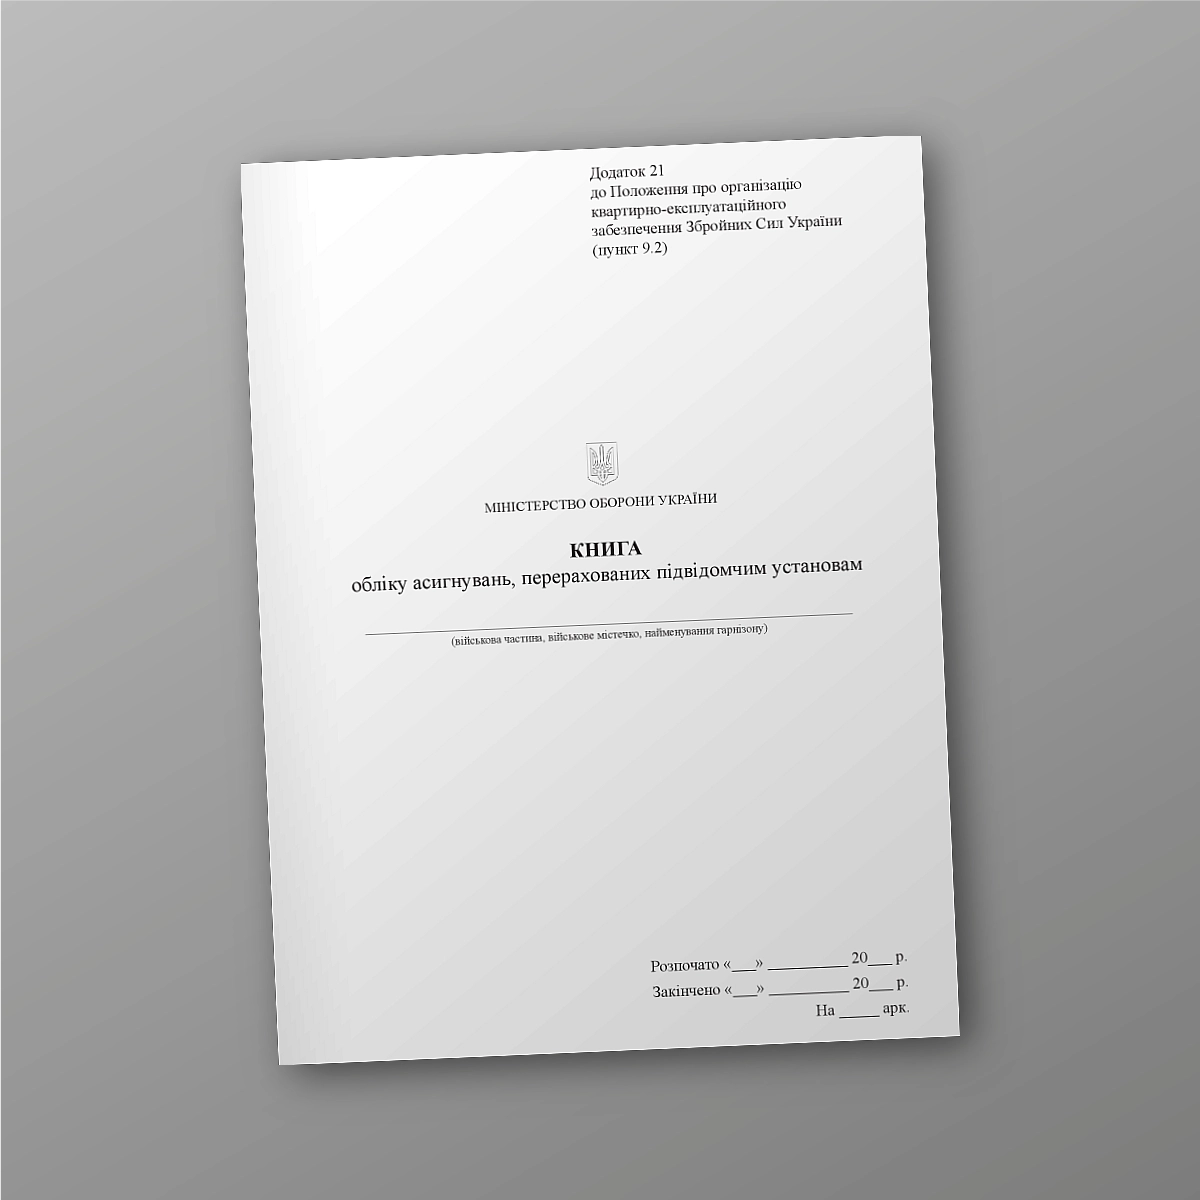 Accounting book of allocations transferred to subordinate institutions | PrintTo: